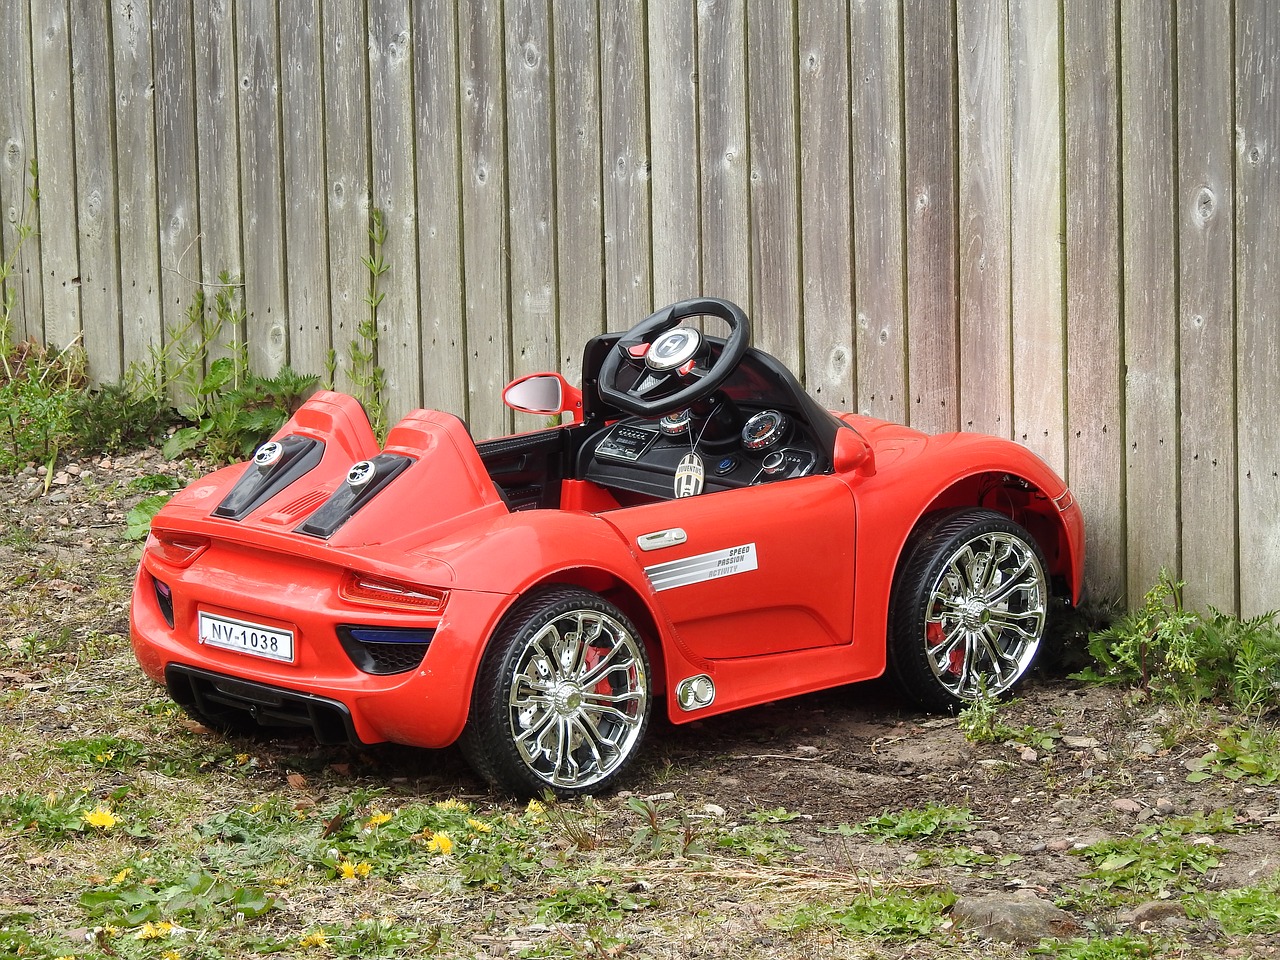 Download free photo of Toy car,parked,juventus,red car,childs toy - from needpix.com